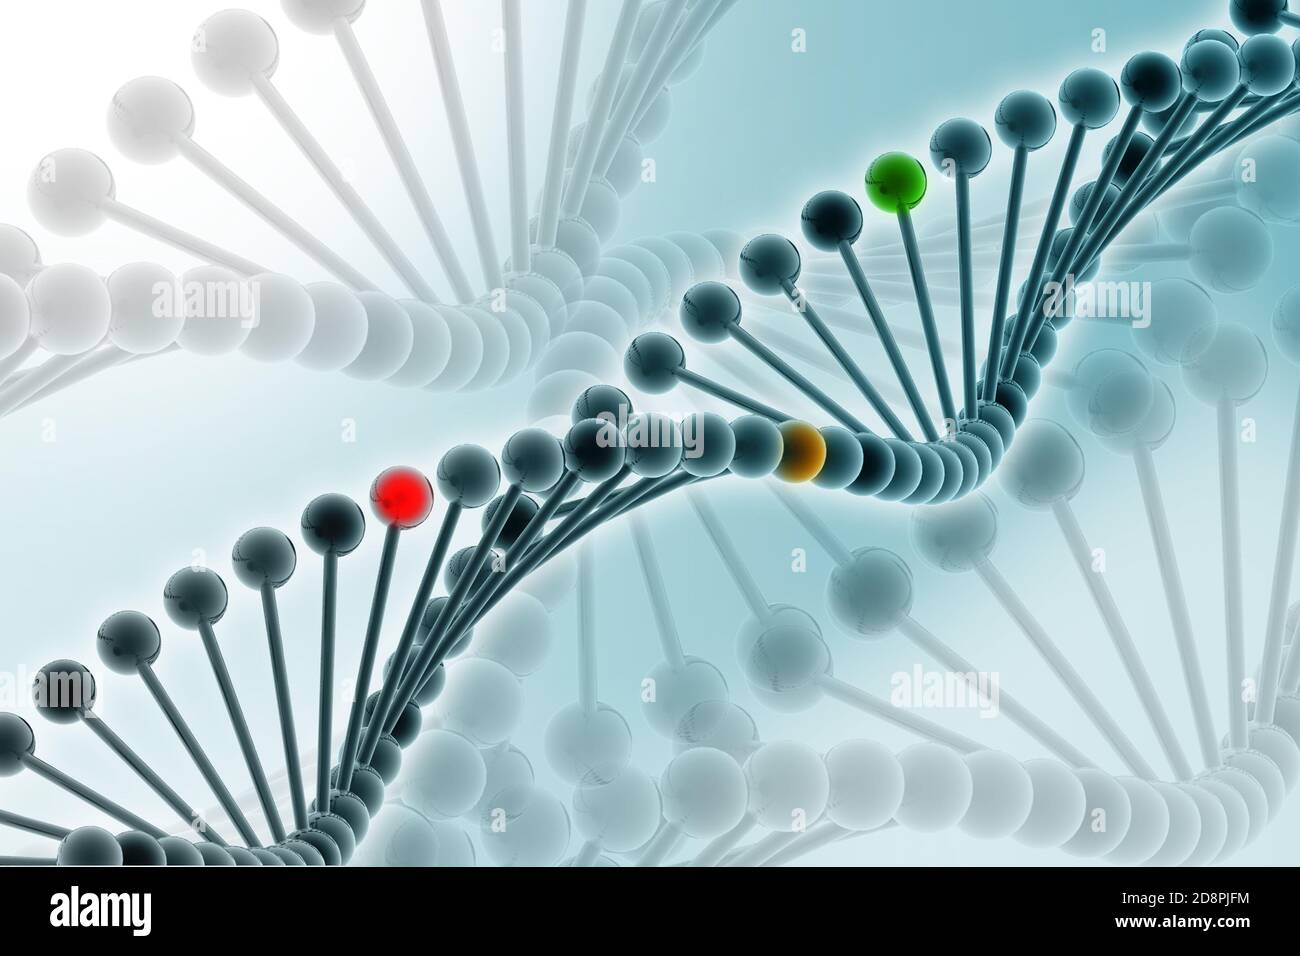 3d illustration of DNA in abstract background Stock Photo